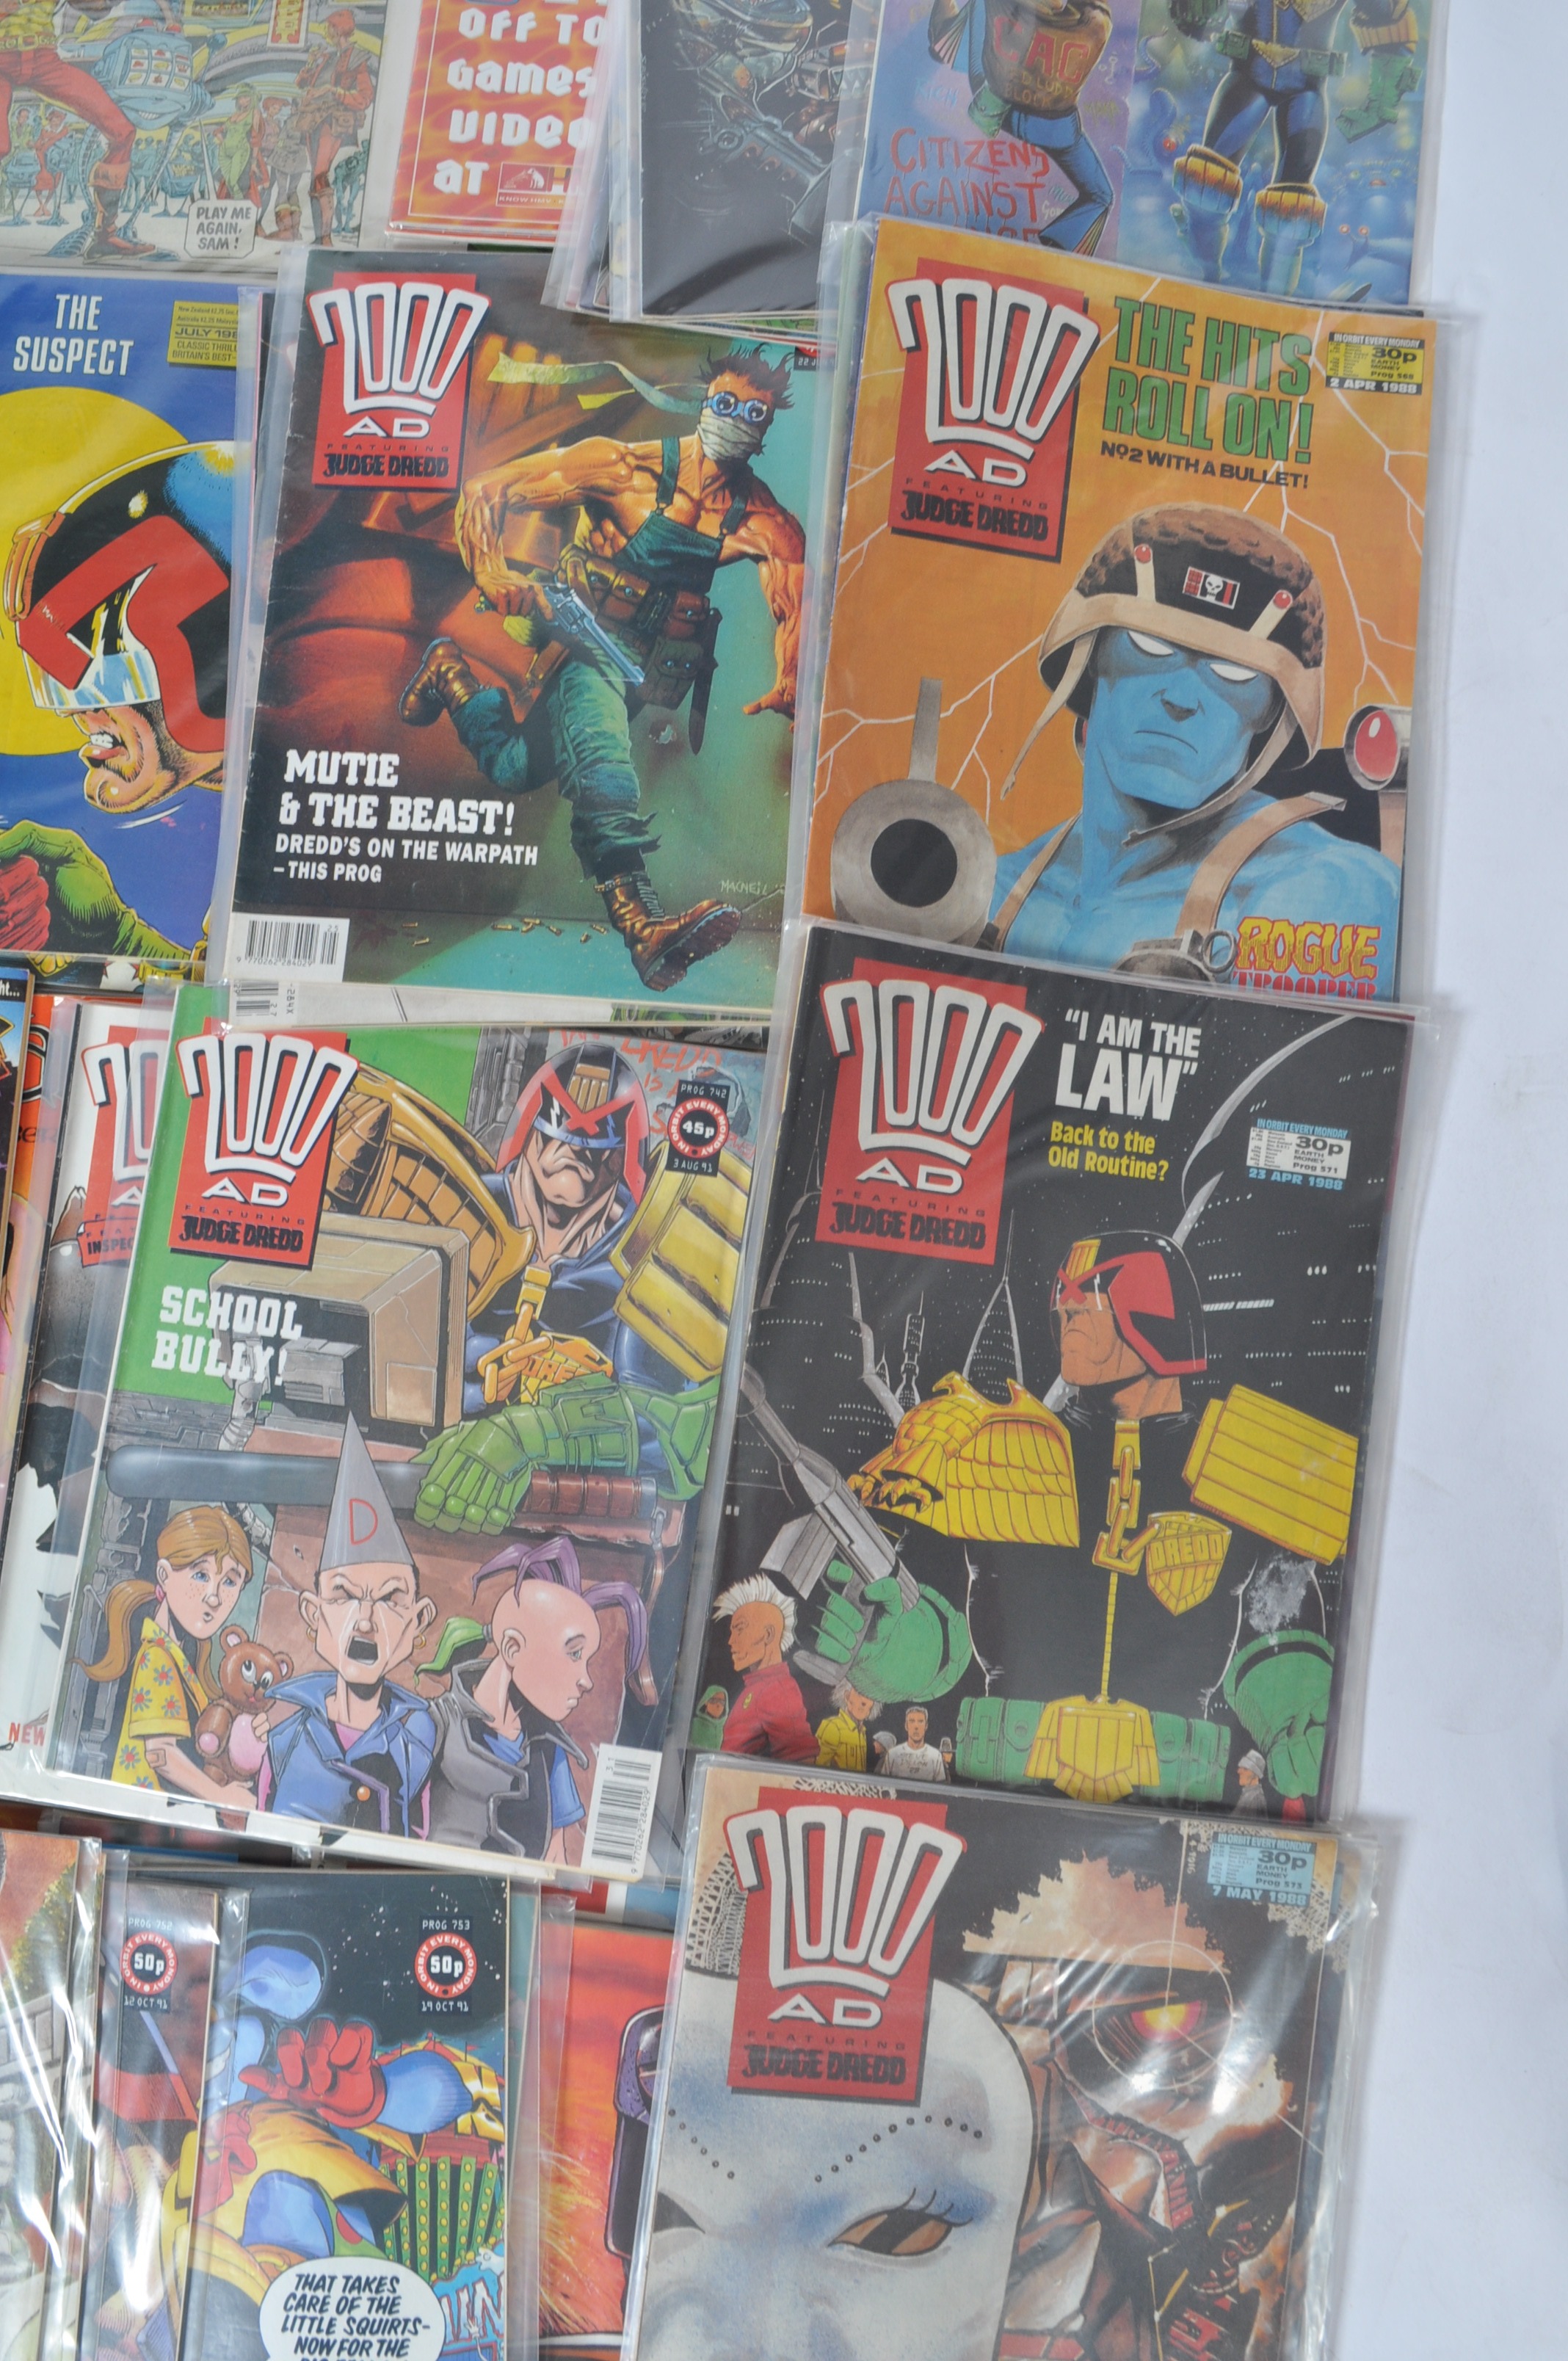 COMIC BOOKS - 2000AD - LARGE COLLECTION OF VINTAGE COMIC BOOKS - Image 3 of 17